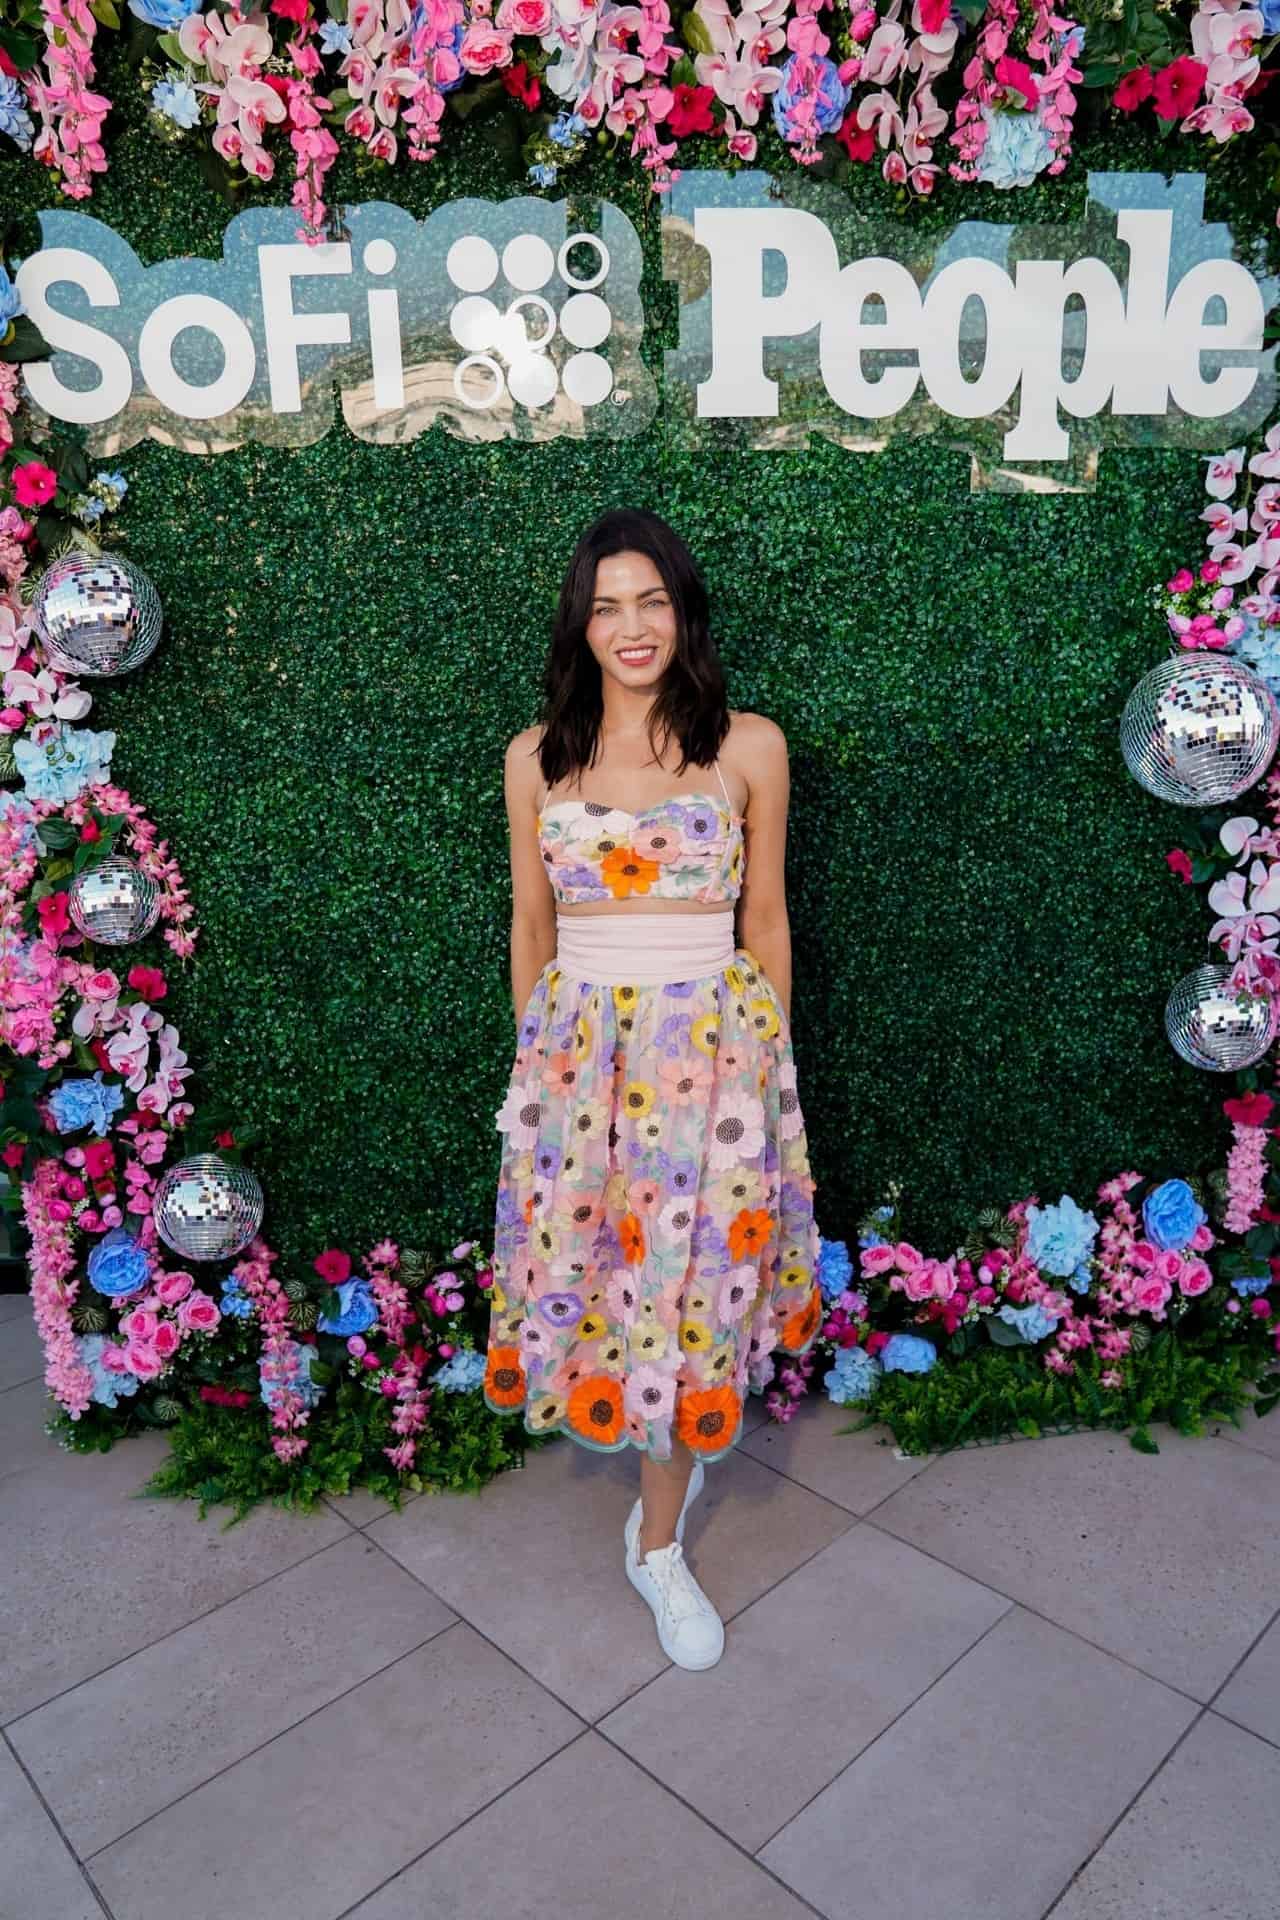 Jenna Dewan Stuns in Floral Top and Skirt at Taylor Swift Pre-Concert Party